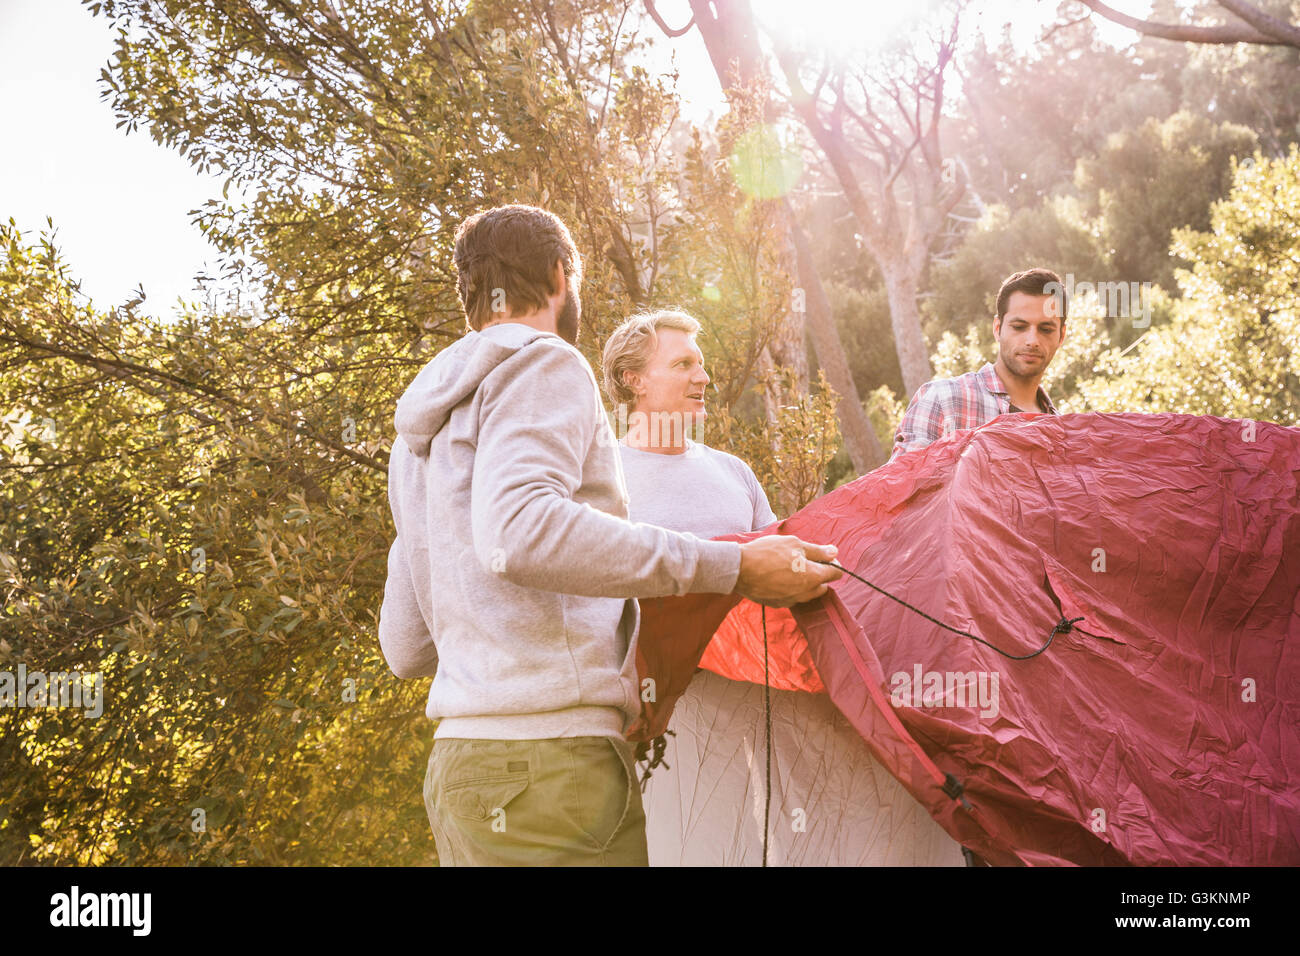 Two men erecting dome tent in forest, Deer Park, Cape Town, South Africa Stock Photo